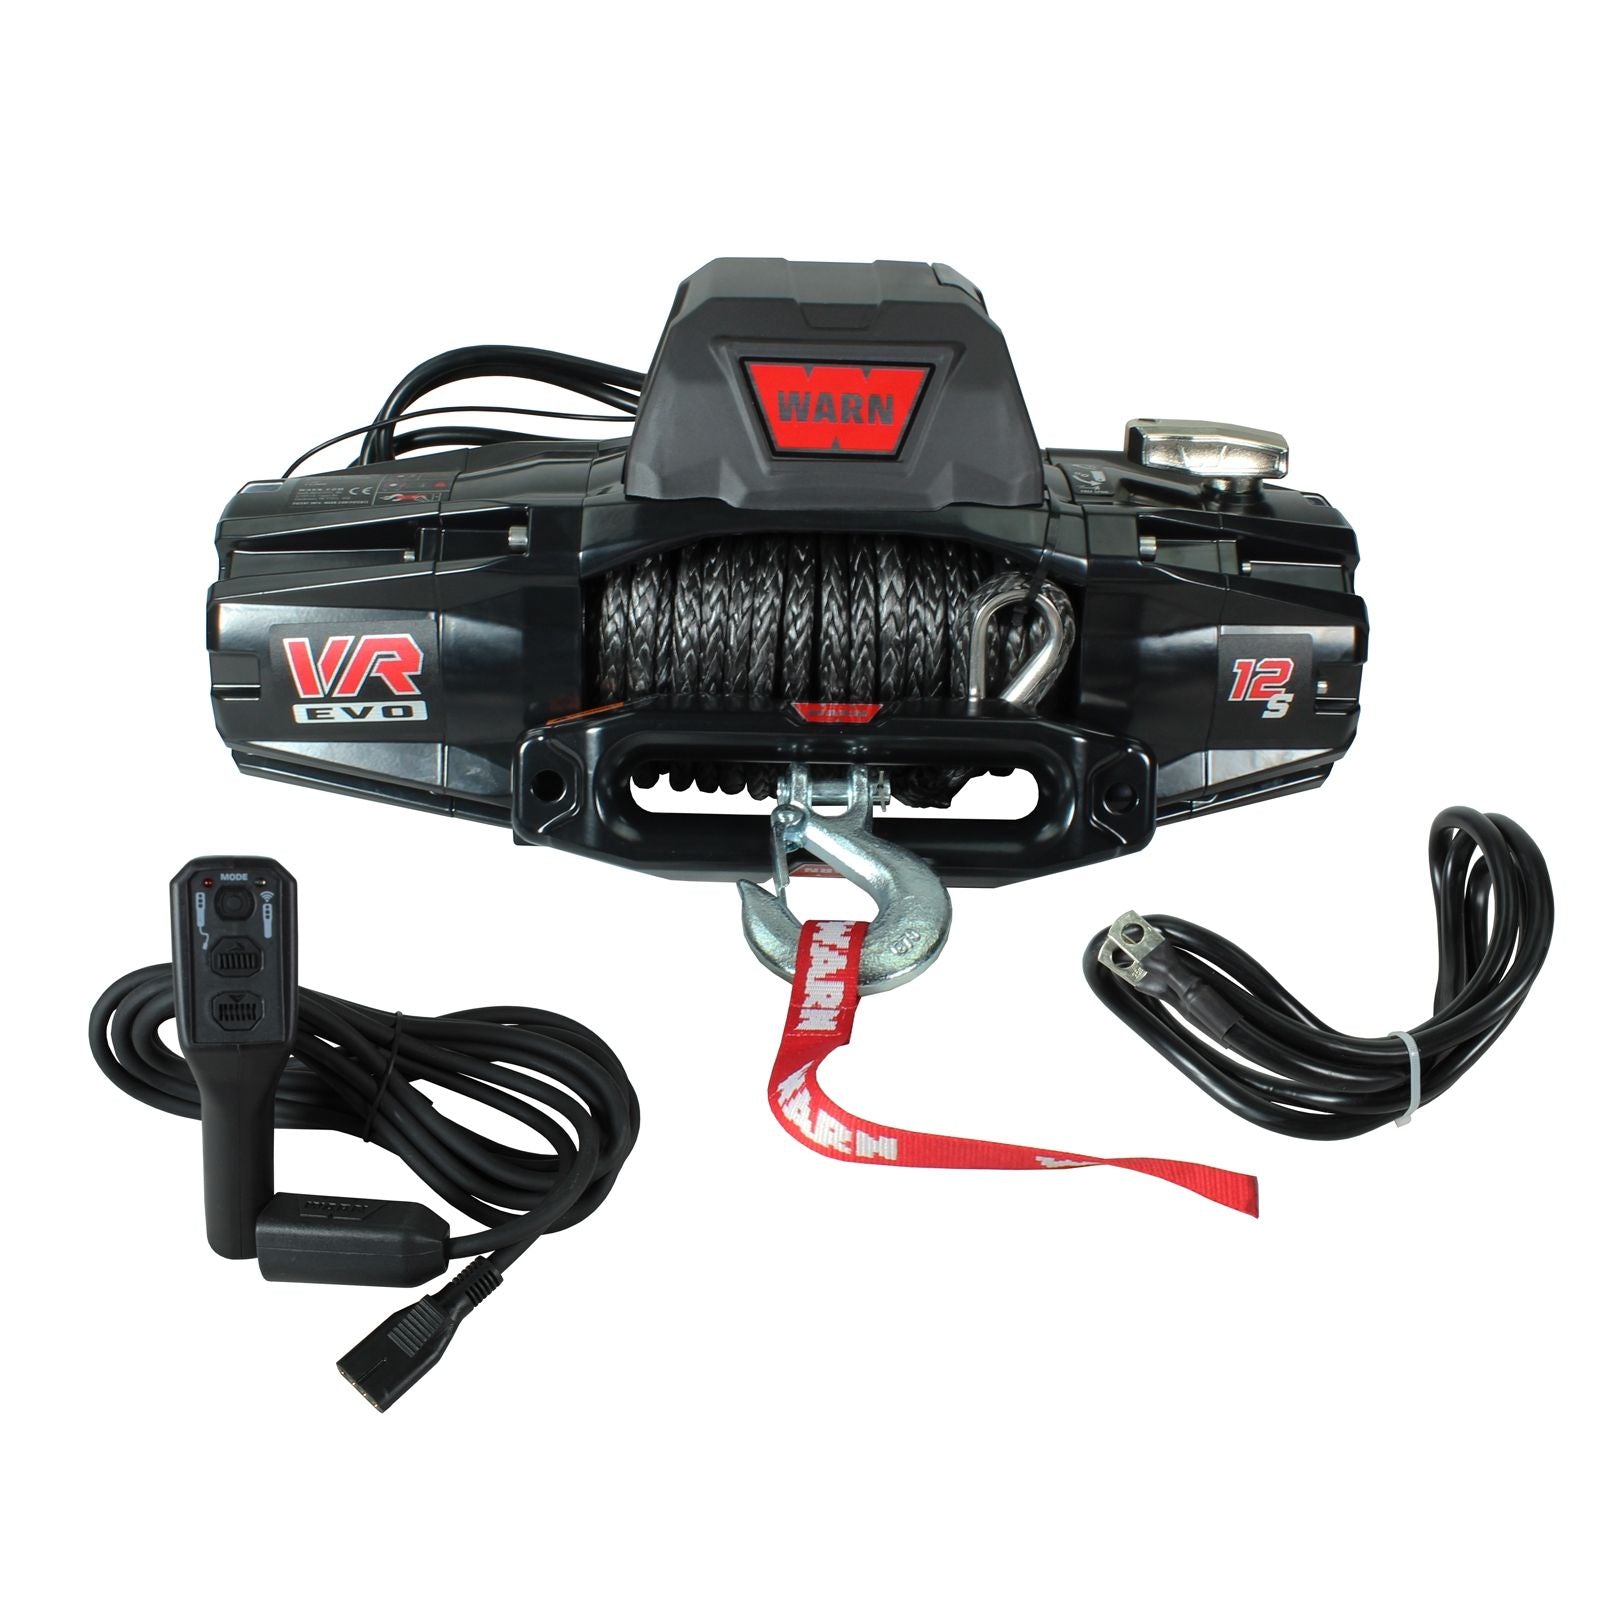 Warn VR Evo 12 12v Steel Rope Electric Winch with Wireless overview